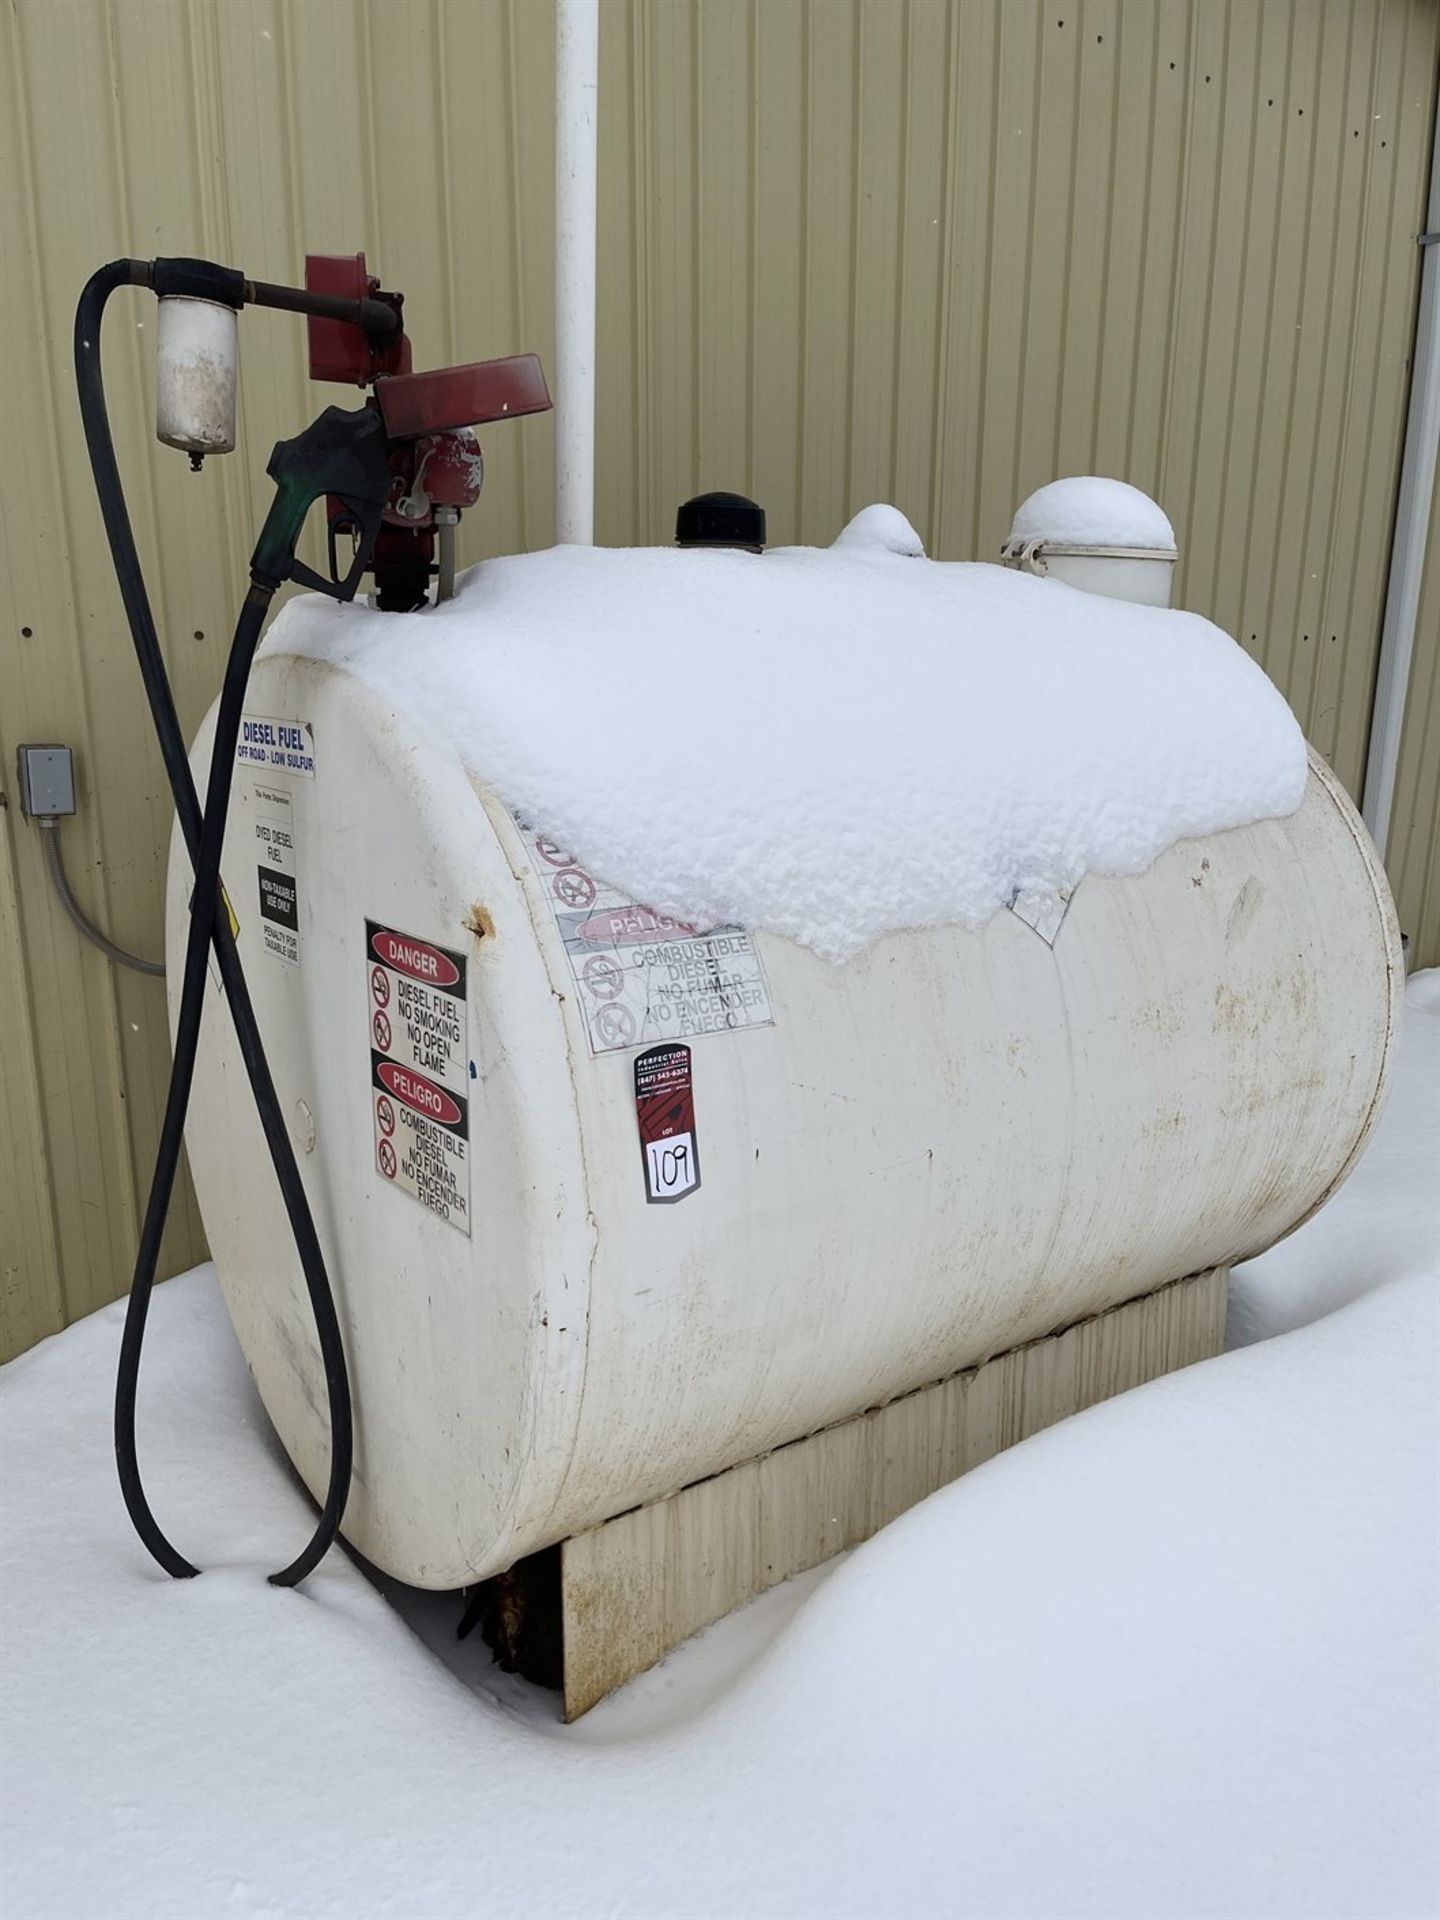 Approx. 1,000 Gallon Diesel Tank, (Pump Not Included)